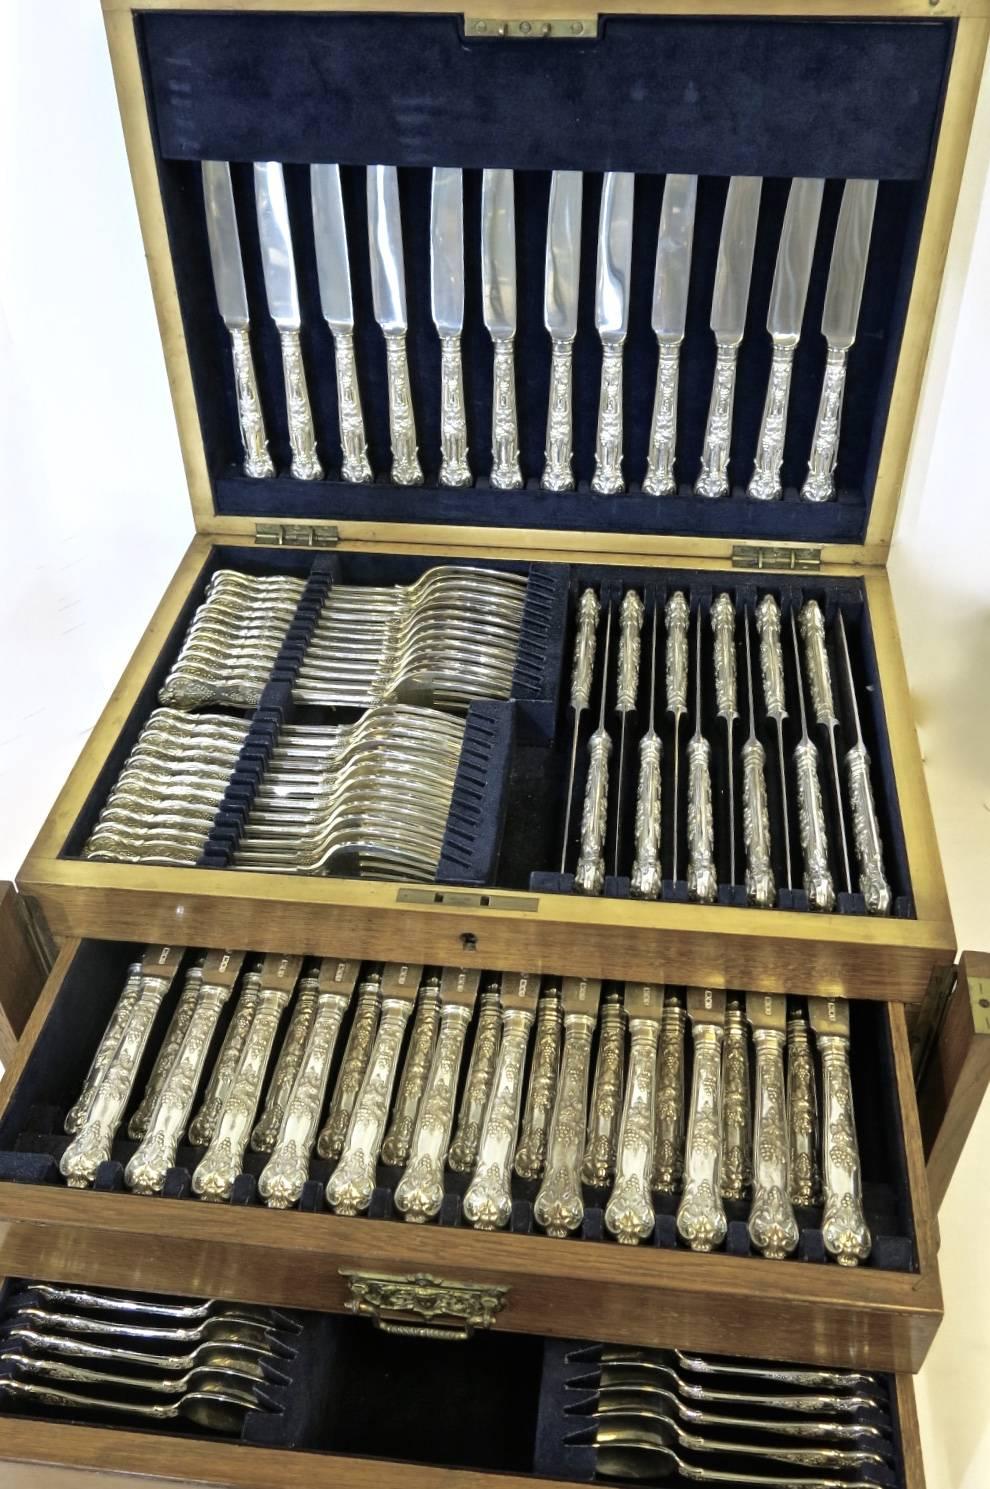 English sterling silver 'Bright Vine' pattern flatware set complete for 12 people, including the all silver fish knives and forks in fitted case. The entire set is sterling silver, except the blades of the dinner and cheese knives which are